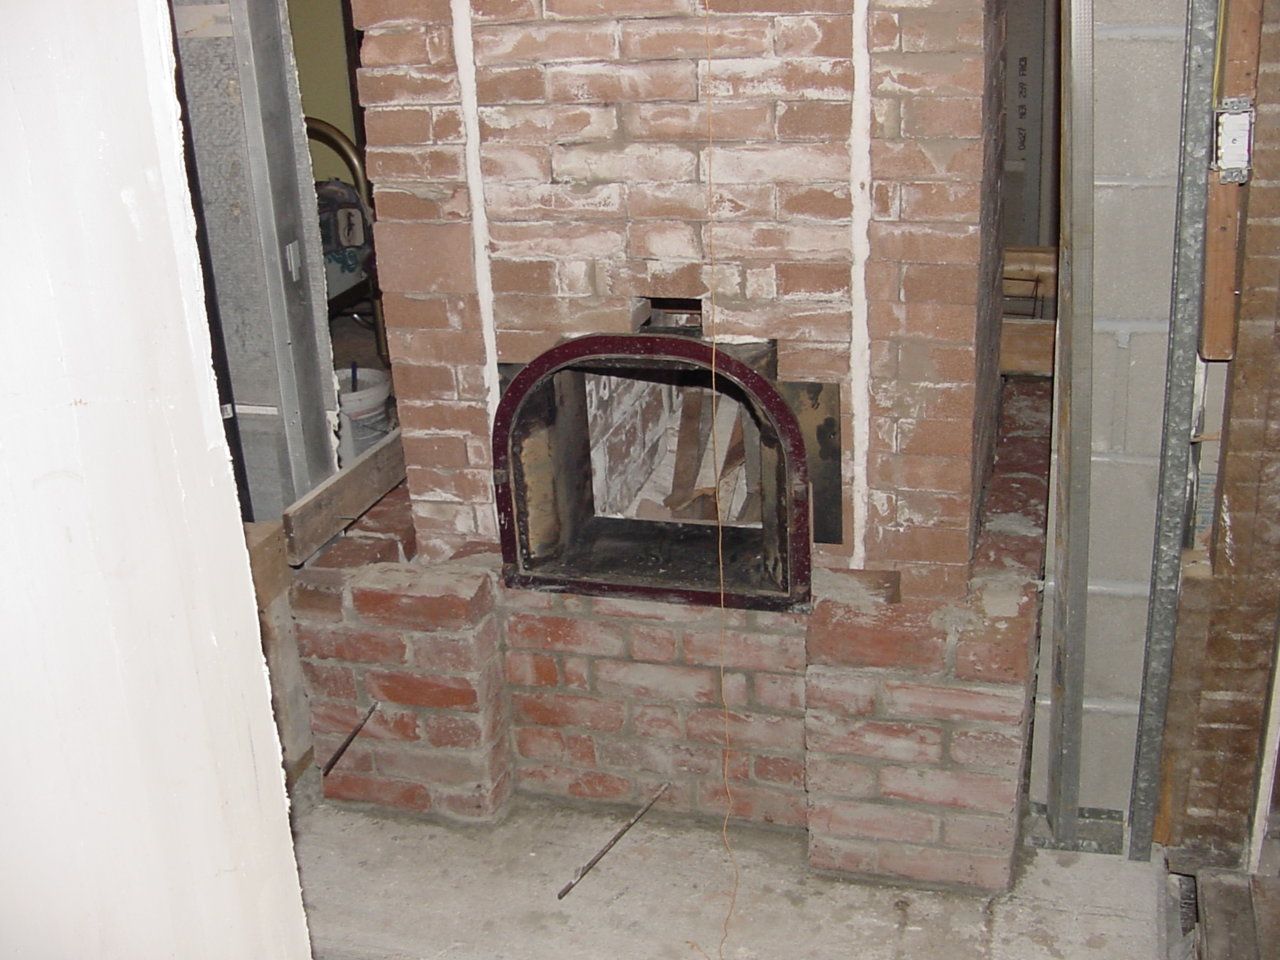 Inside core build w. refractory brick. Door was salvaged from Fireplace insert and had brackets attached to mount it within the brick work.